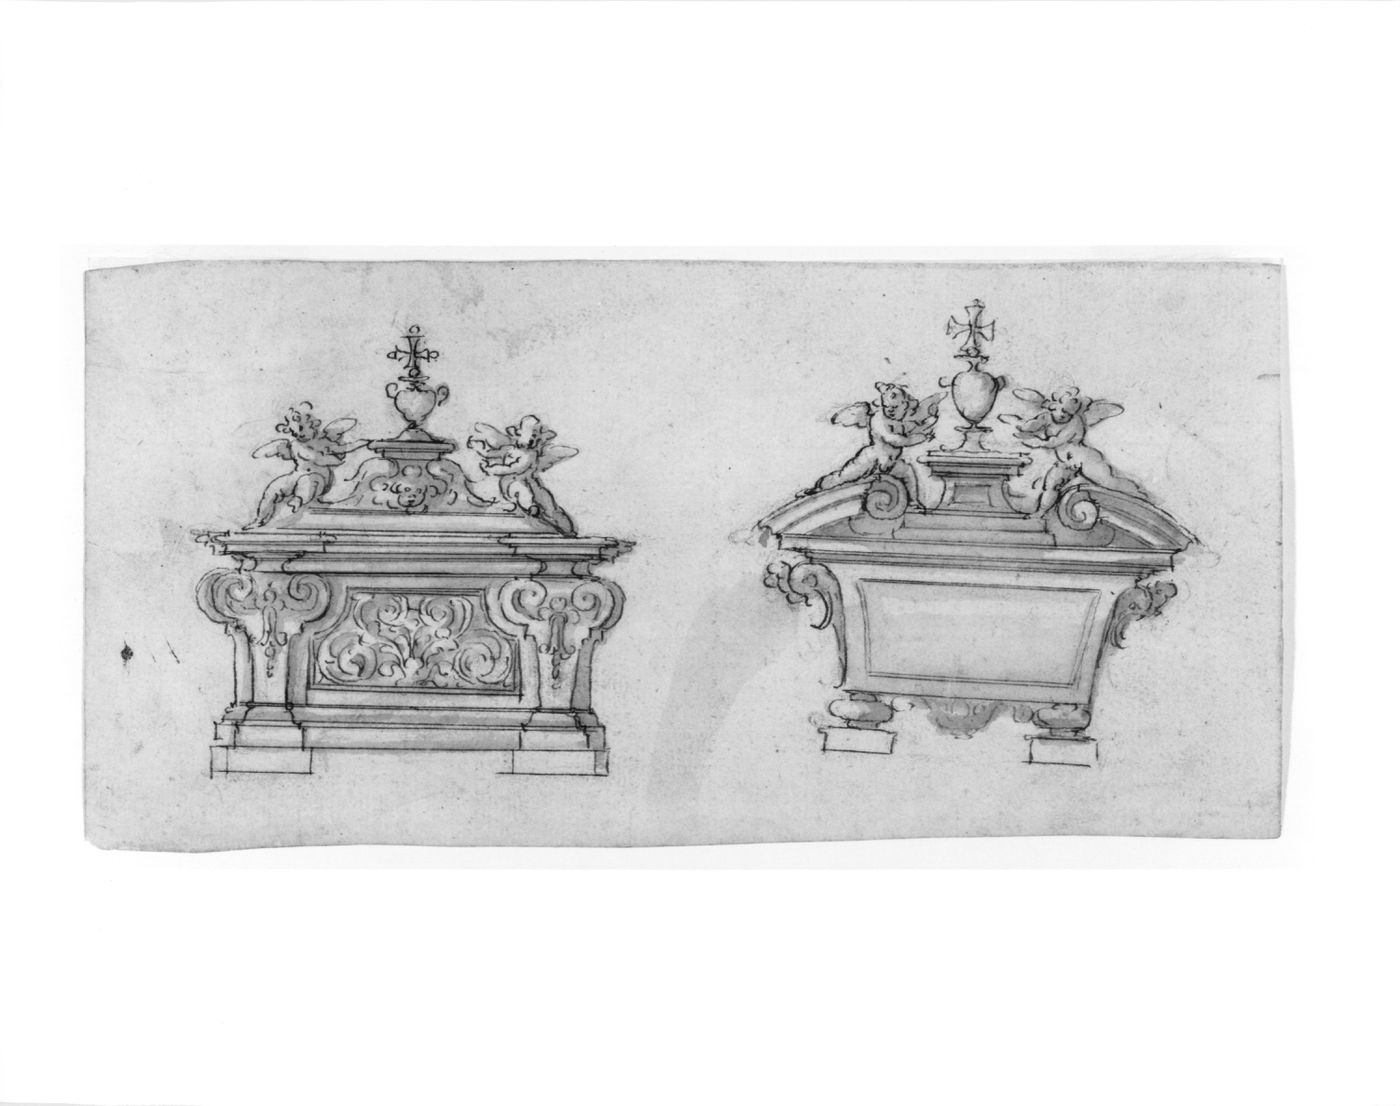 Two tomb designs